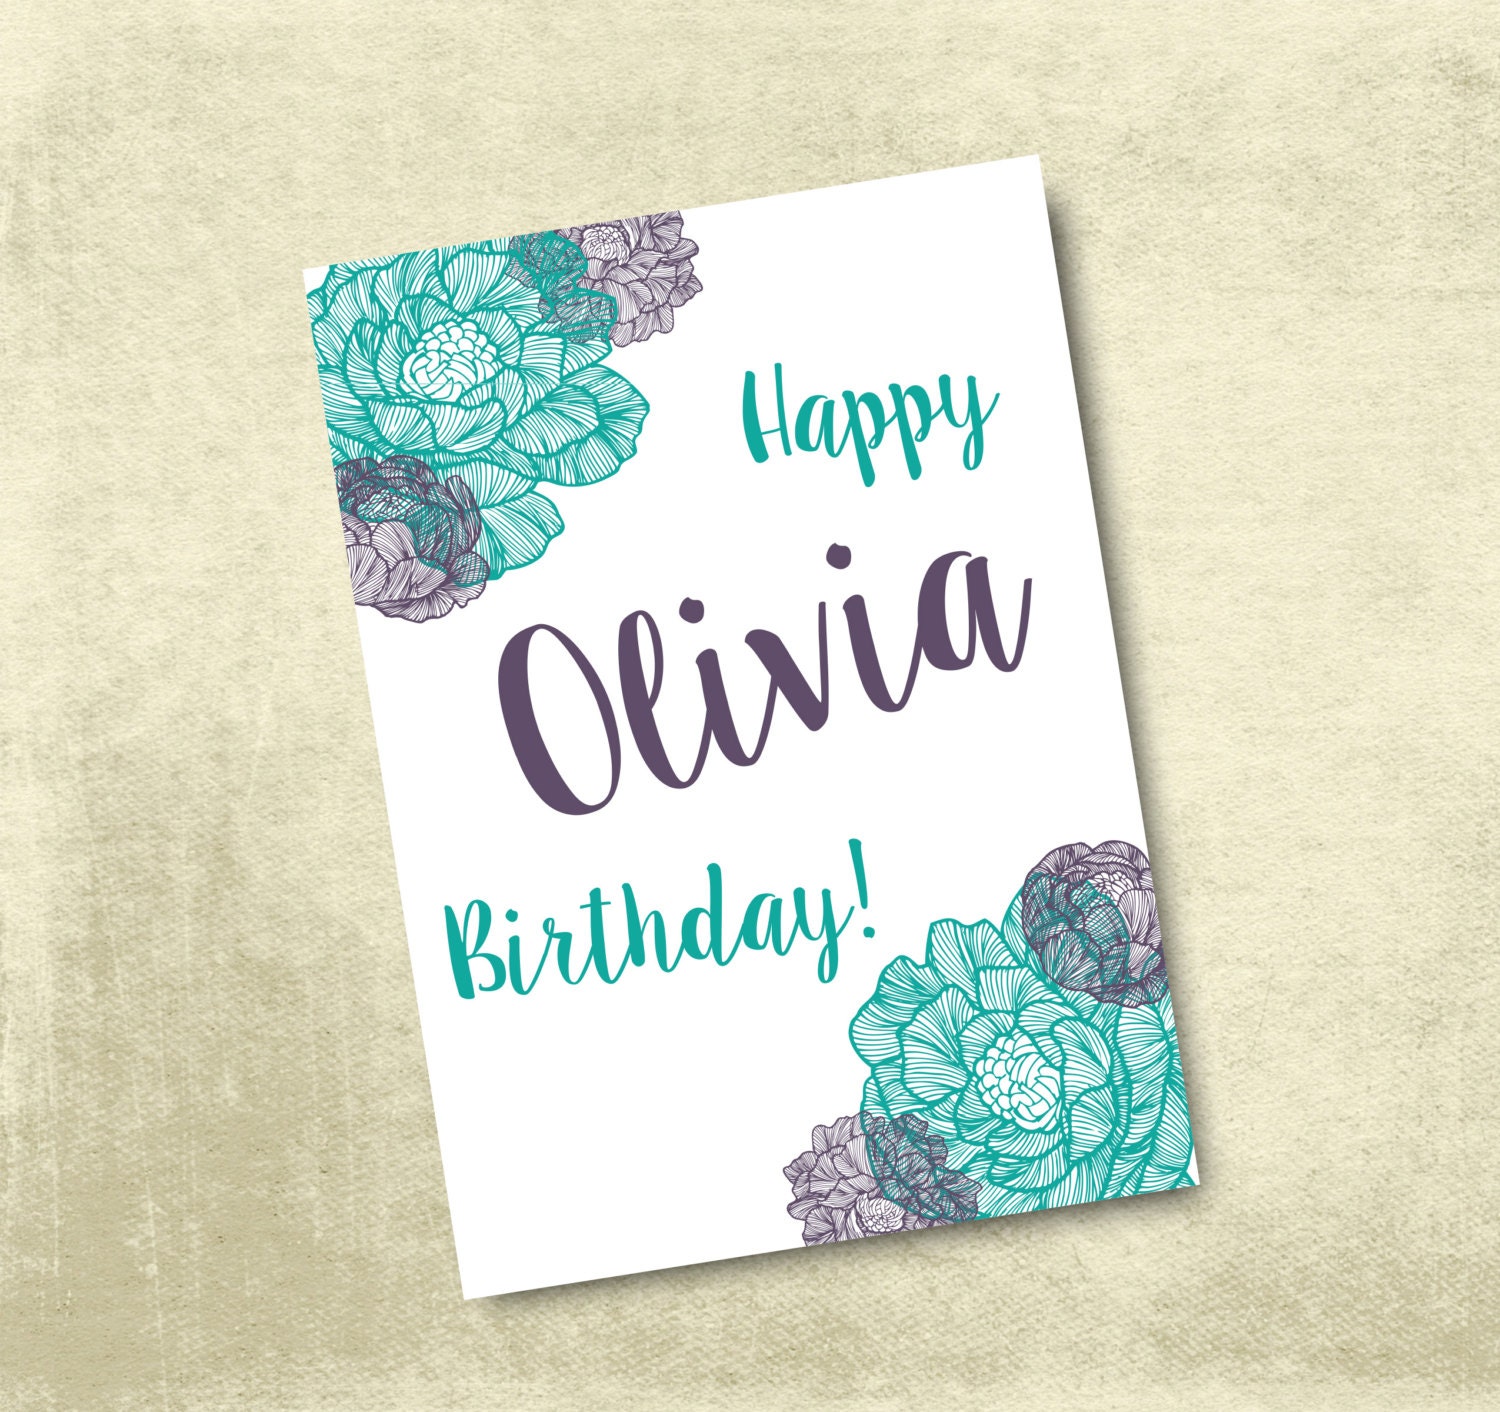 22-of-the-best-ideas-for-personalized-birthday-cards-home-family